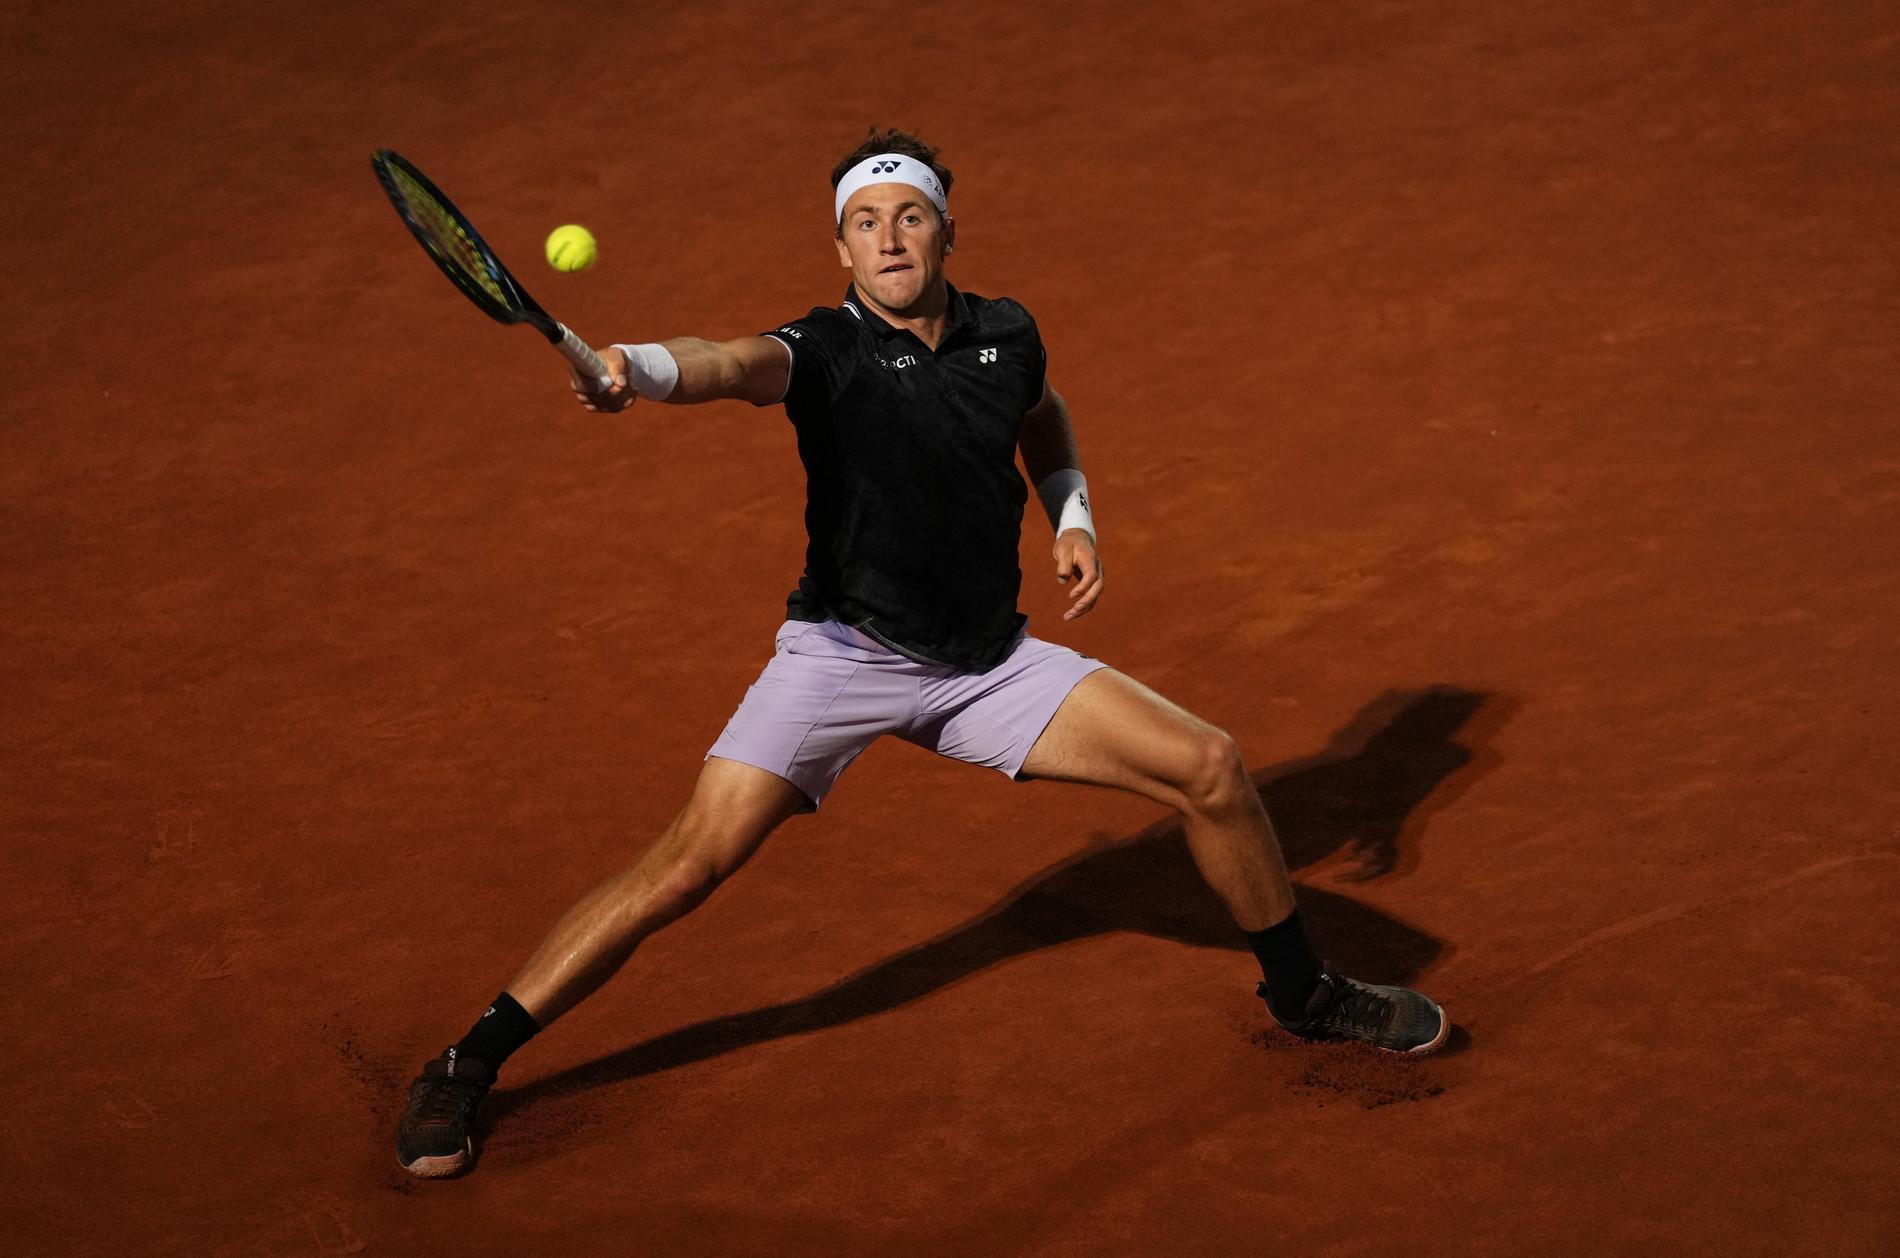 Casper Rudd excels in the first match in Rome: Arthur Renderknech played